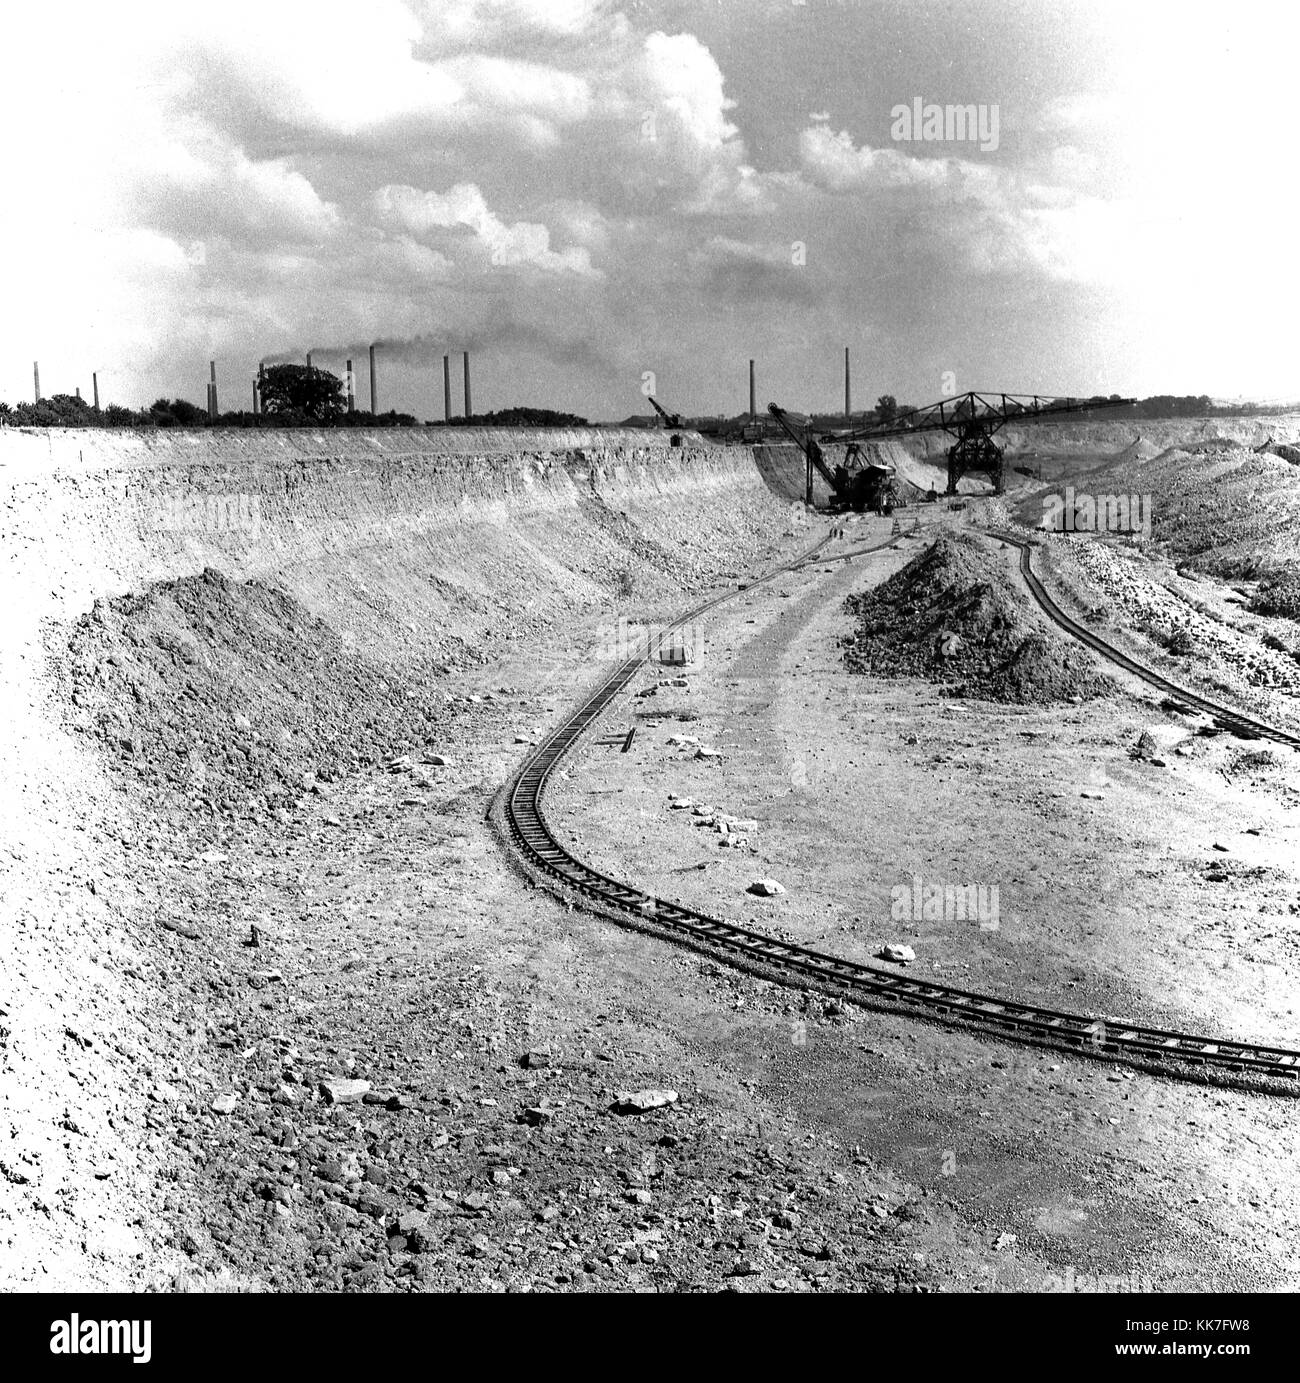 1950s, historical picture showing the vast land area at the London Brick Company which has been dug-up or mined for brick soil, in this case, it is the valuable raw clay material used in the production of large-scale industrial brick making at Bedford, England, UK. Stock Photo